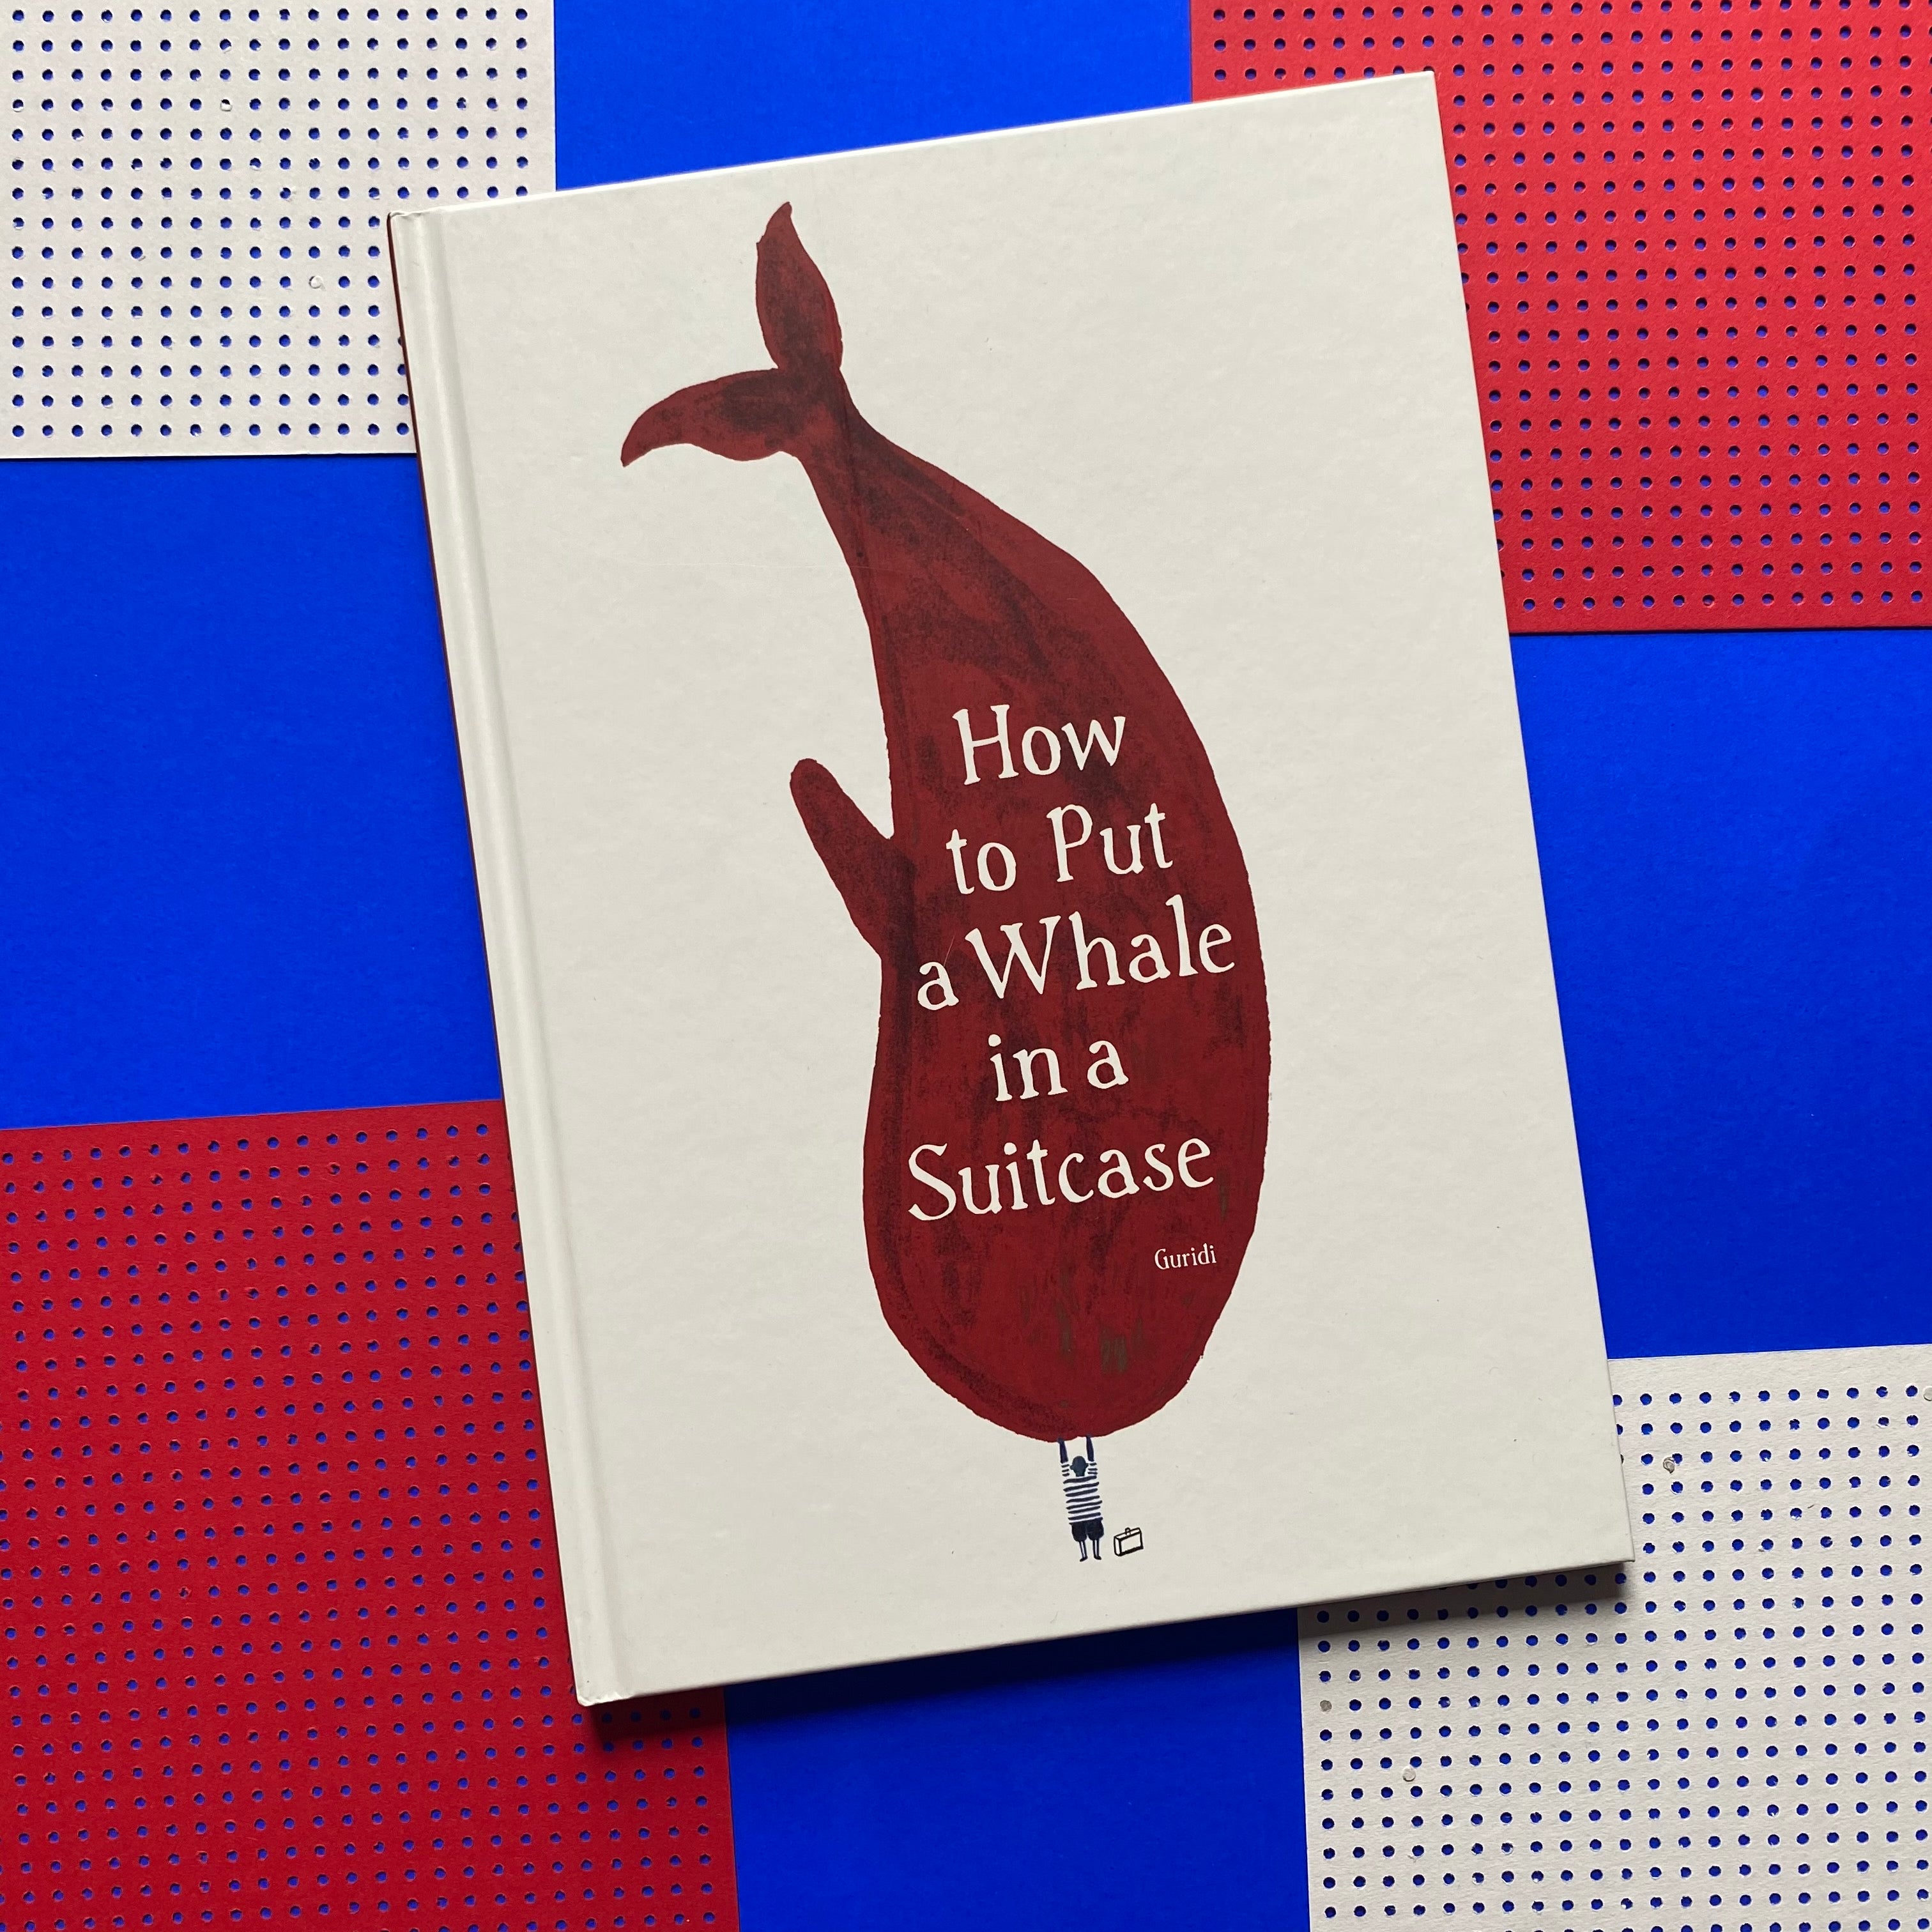 Suitcase　How　Whale　SHELF　In　To　Put　–　A　A　EDITIONS